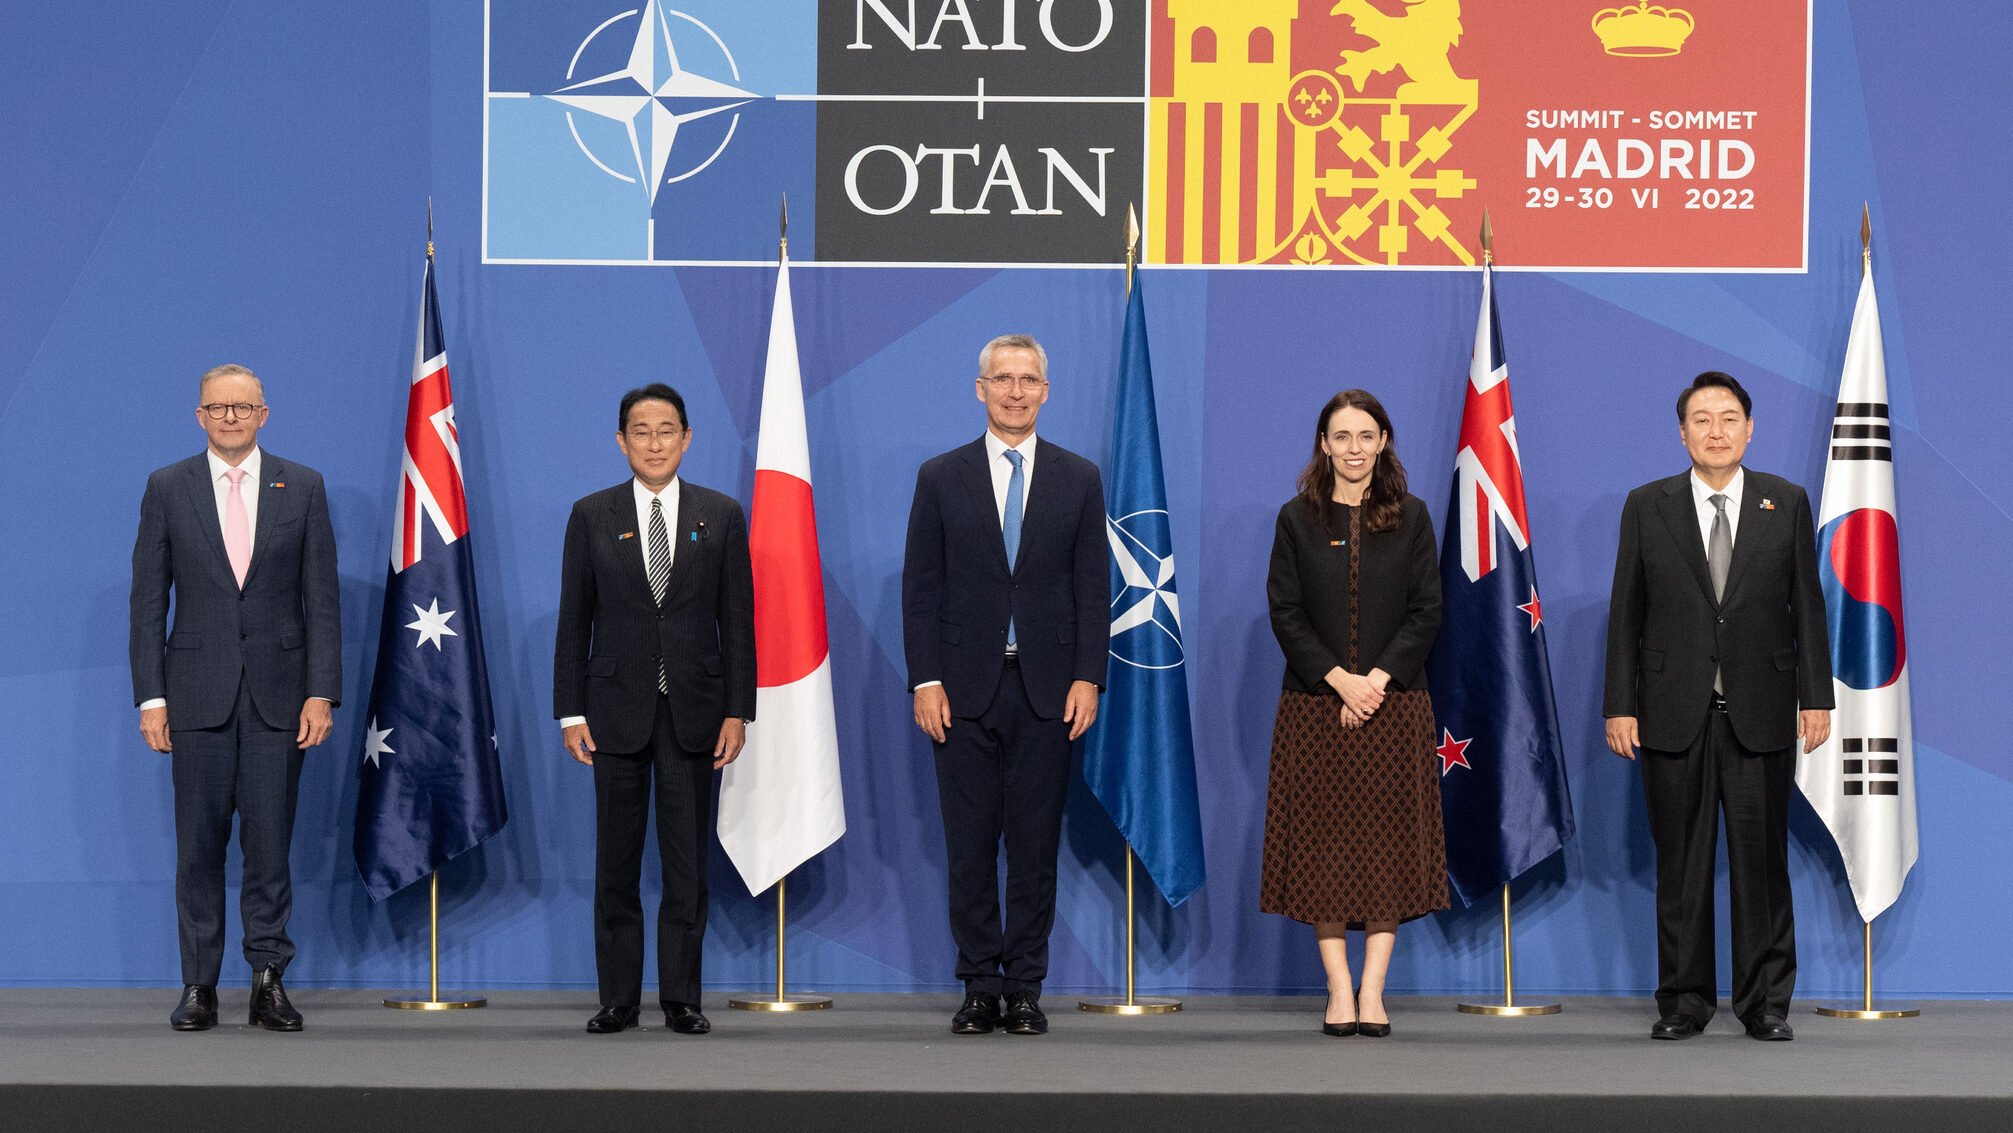 Pacific powers show unity on Russia, China at NATO meeting: a sign of things to come?